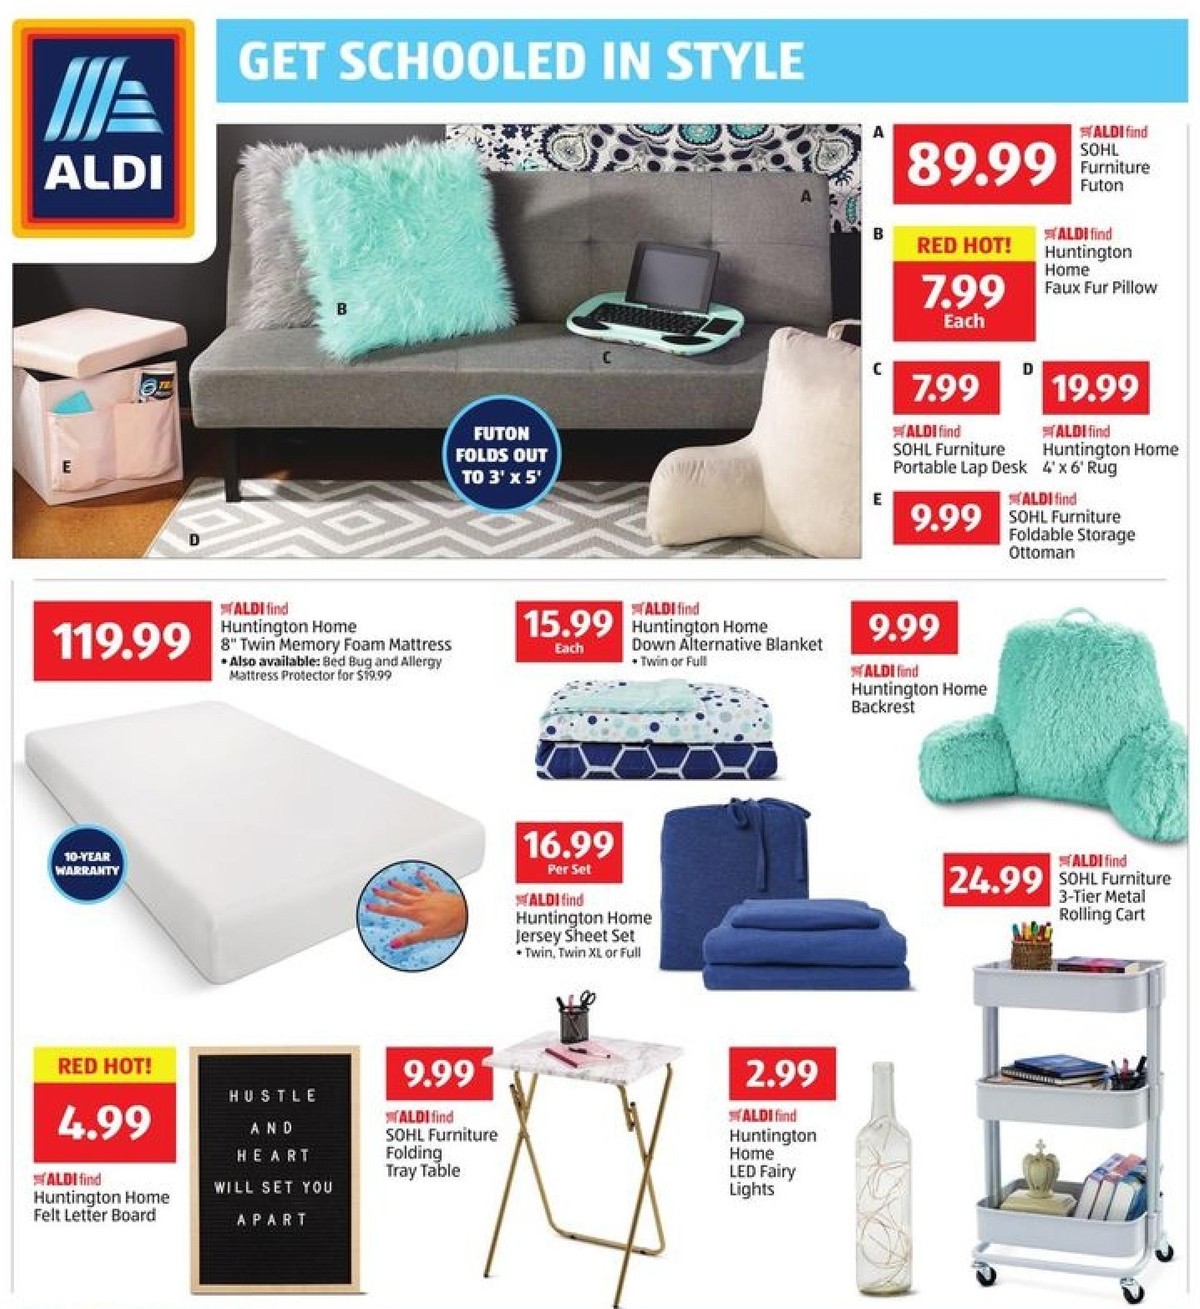 ALDI Weekly Ad from July 14